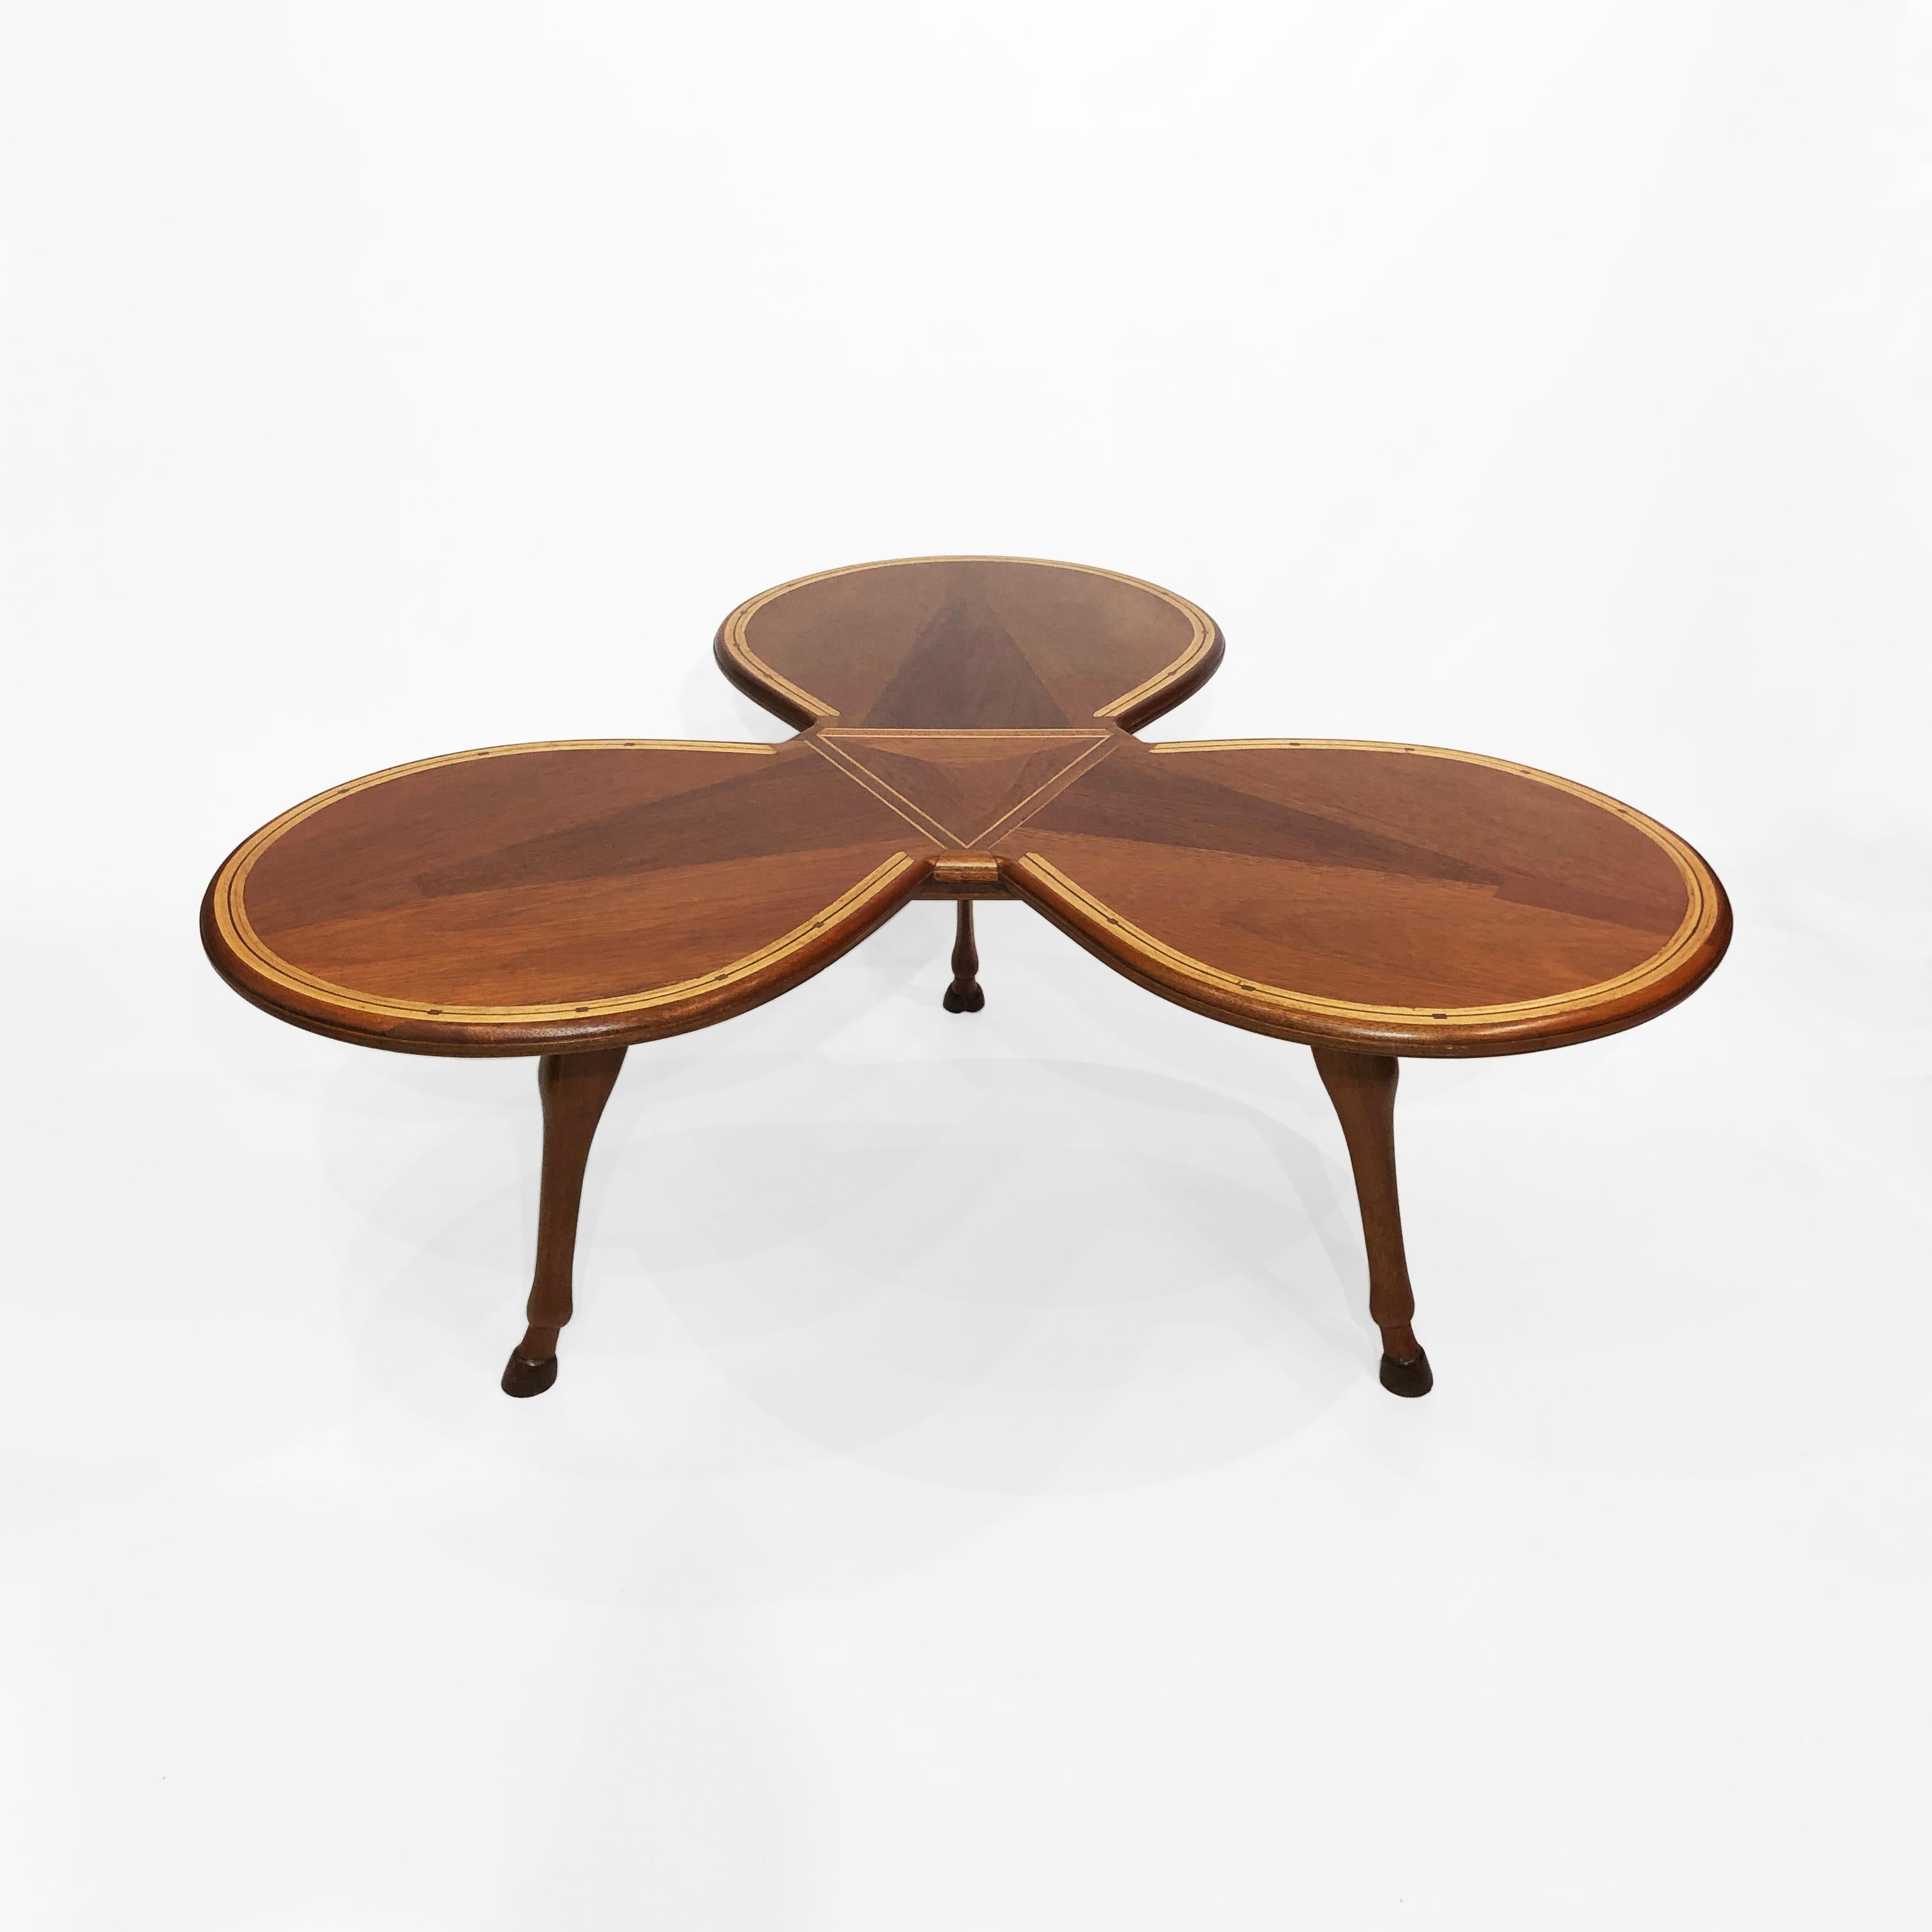 This tripod coffee table in the form of clover leaf and horse petals is a fine example of Midcentury handcrafted marquetry. The three elegant hoof-shaped legs make this coffee table reminiscent of Jacque Adnet’s pieces. The table top is beautifully